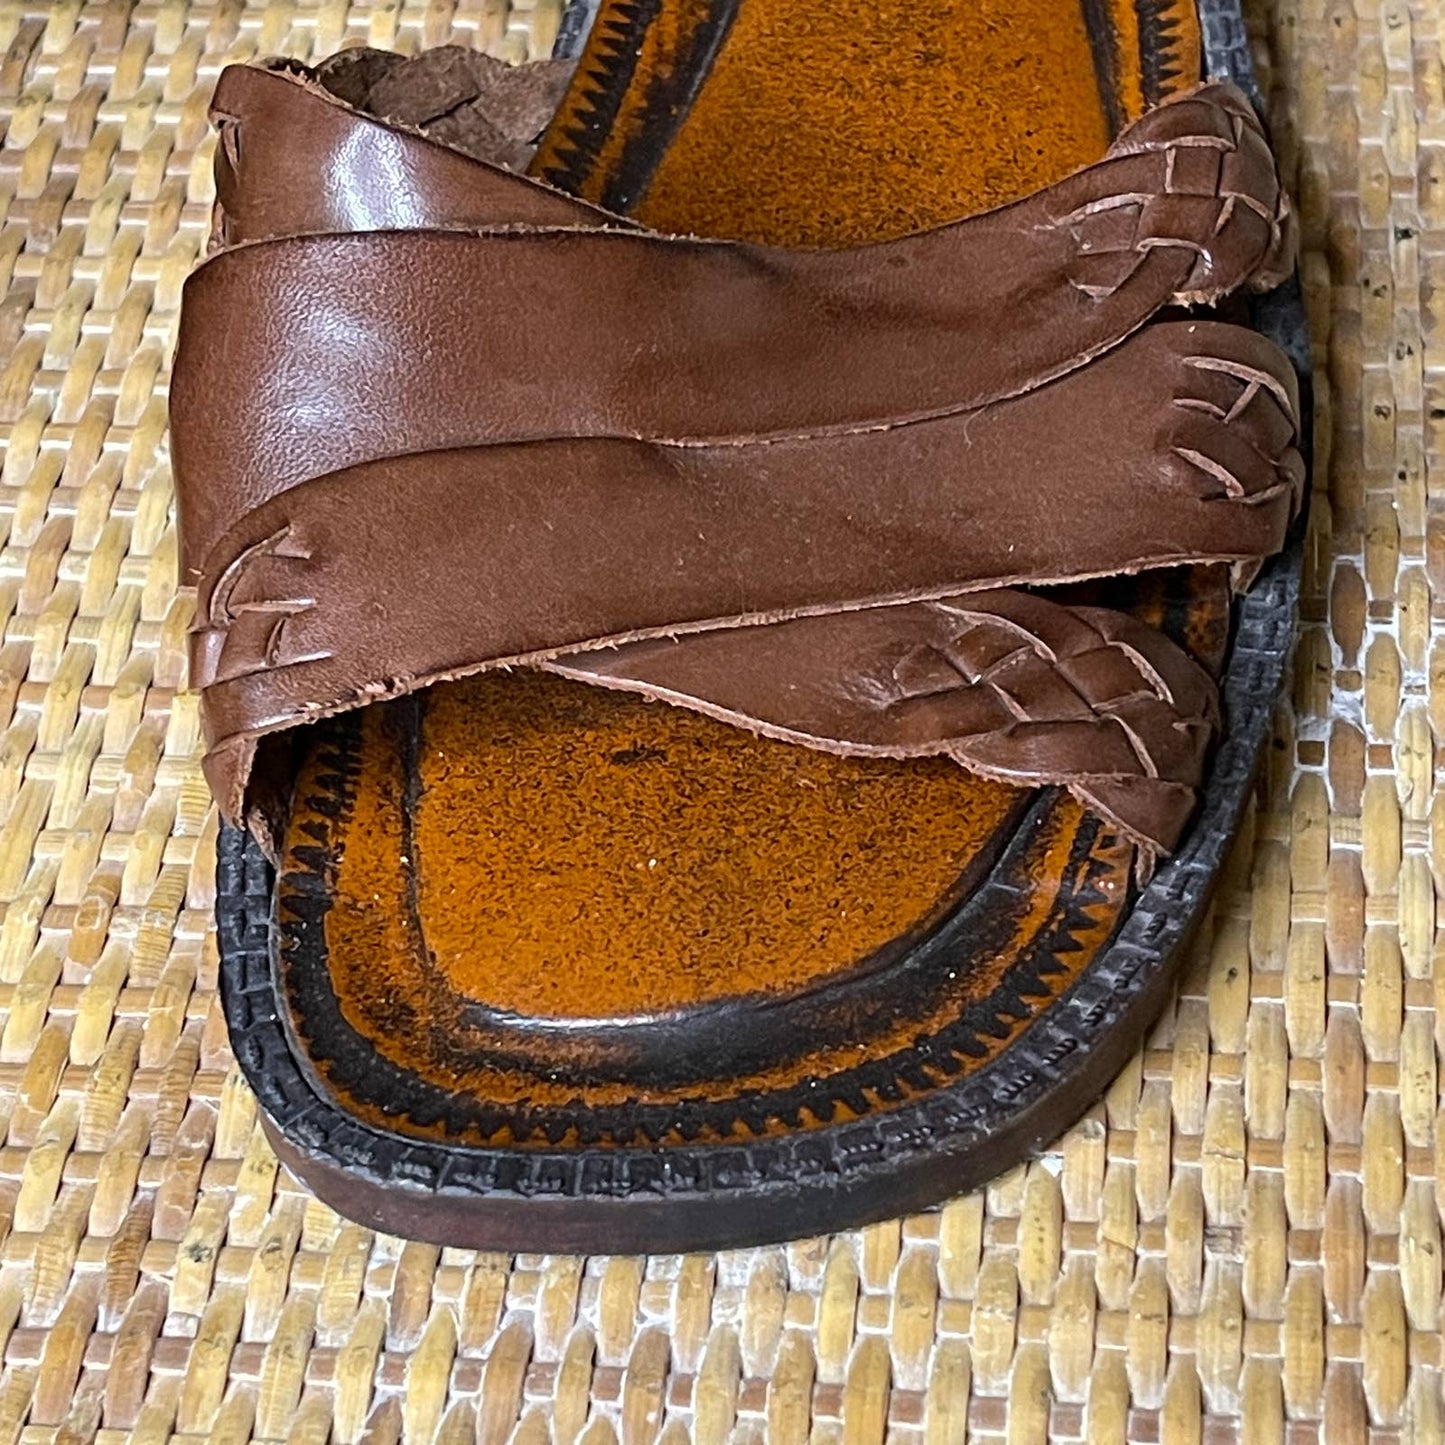 Vintage 90s Brown Leather Sandals Square Toe and Heel by Romano size 8.5